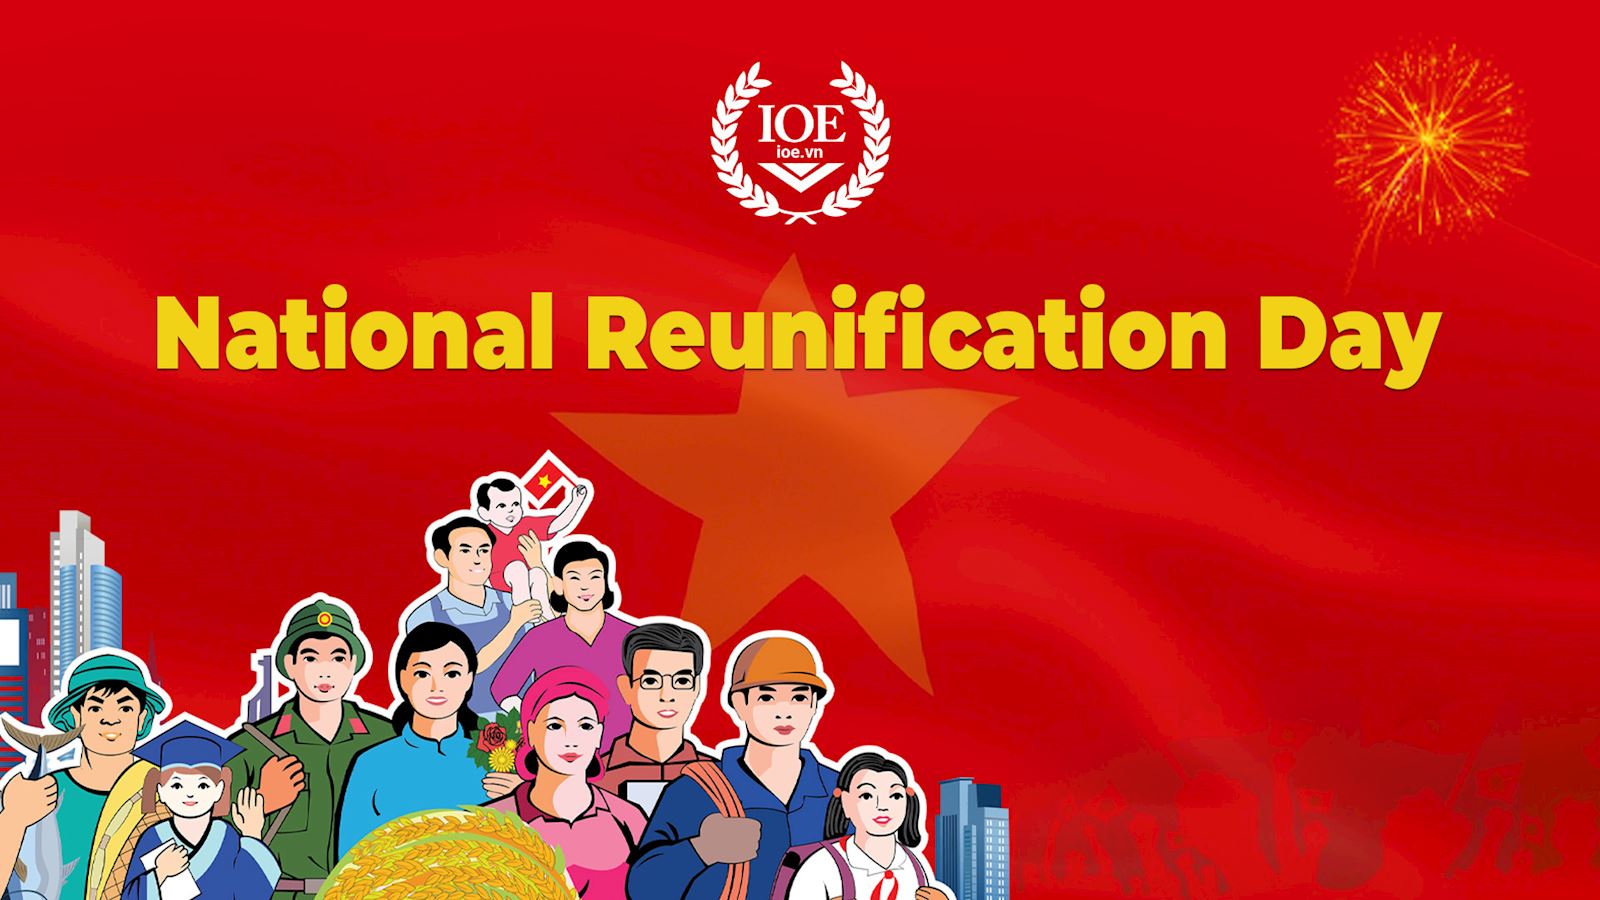 National Reunification Day